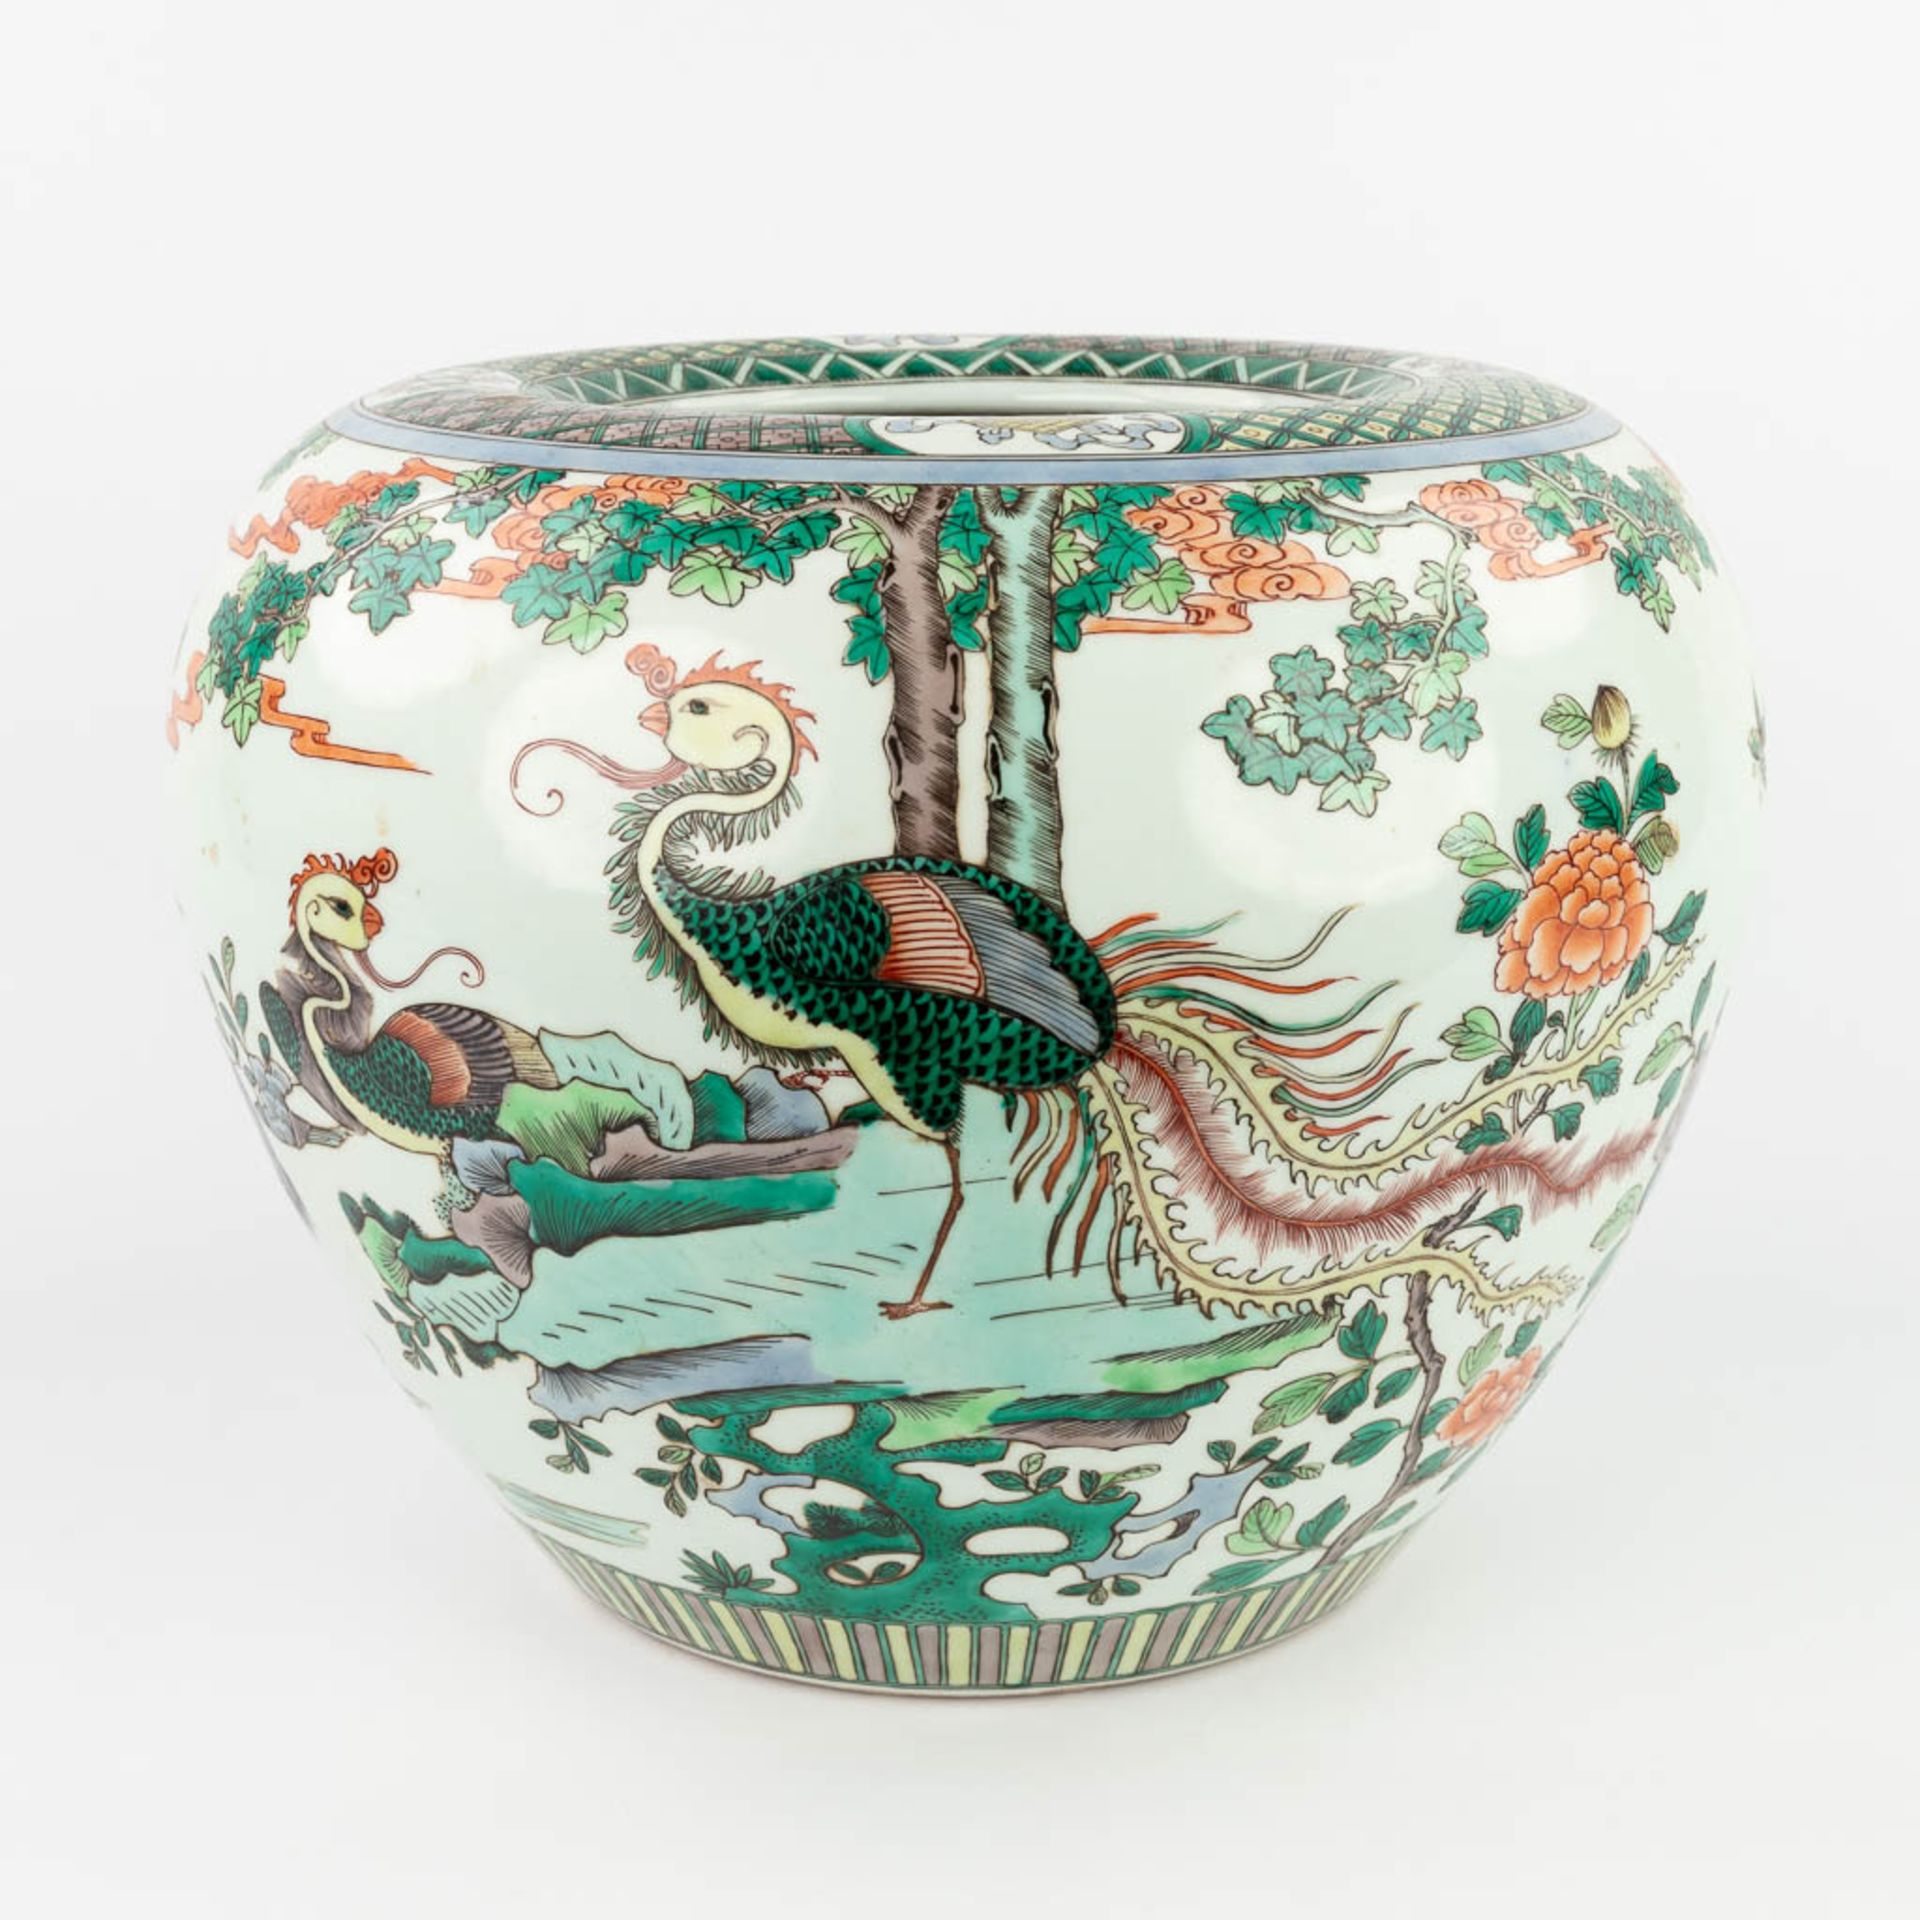 A large Chinese Famille Verte Cache-pot, decorated with cranes, peacocks and ducks. 19th/20th C. (H: